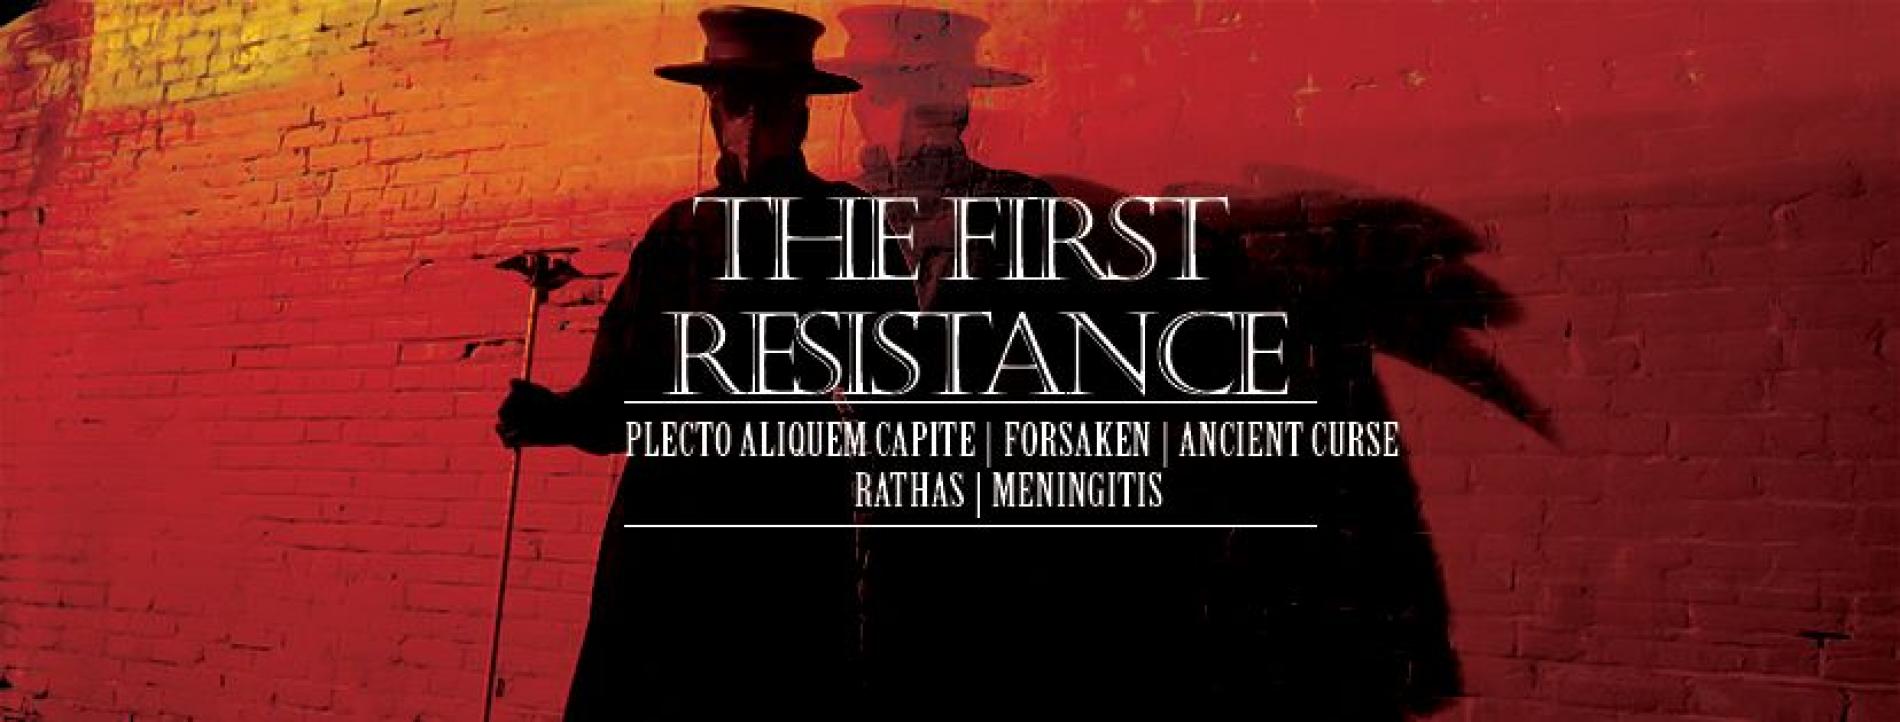 The First Resistance